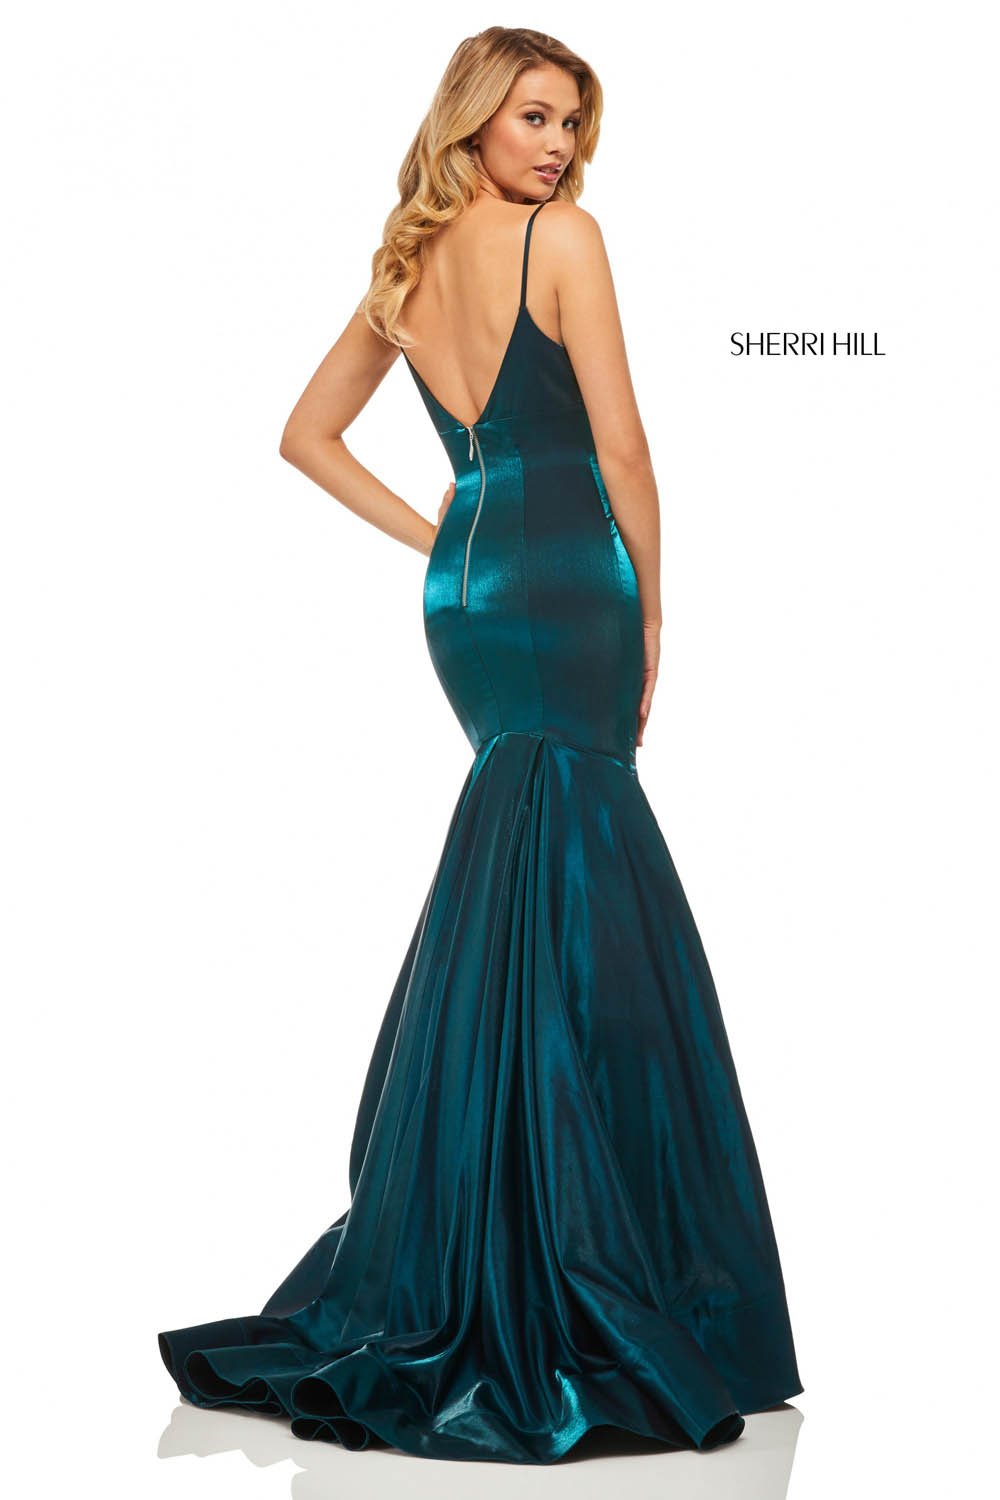 Sherri Hill 52696 dress images in these colors: Dark Purple, Wine, Royal, Teal.